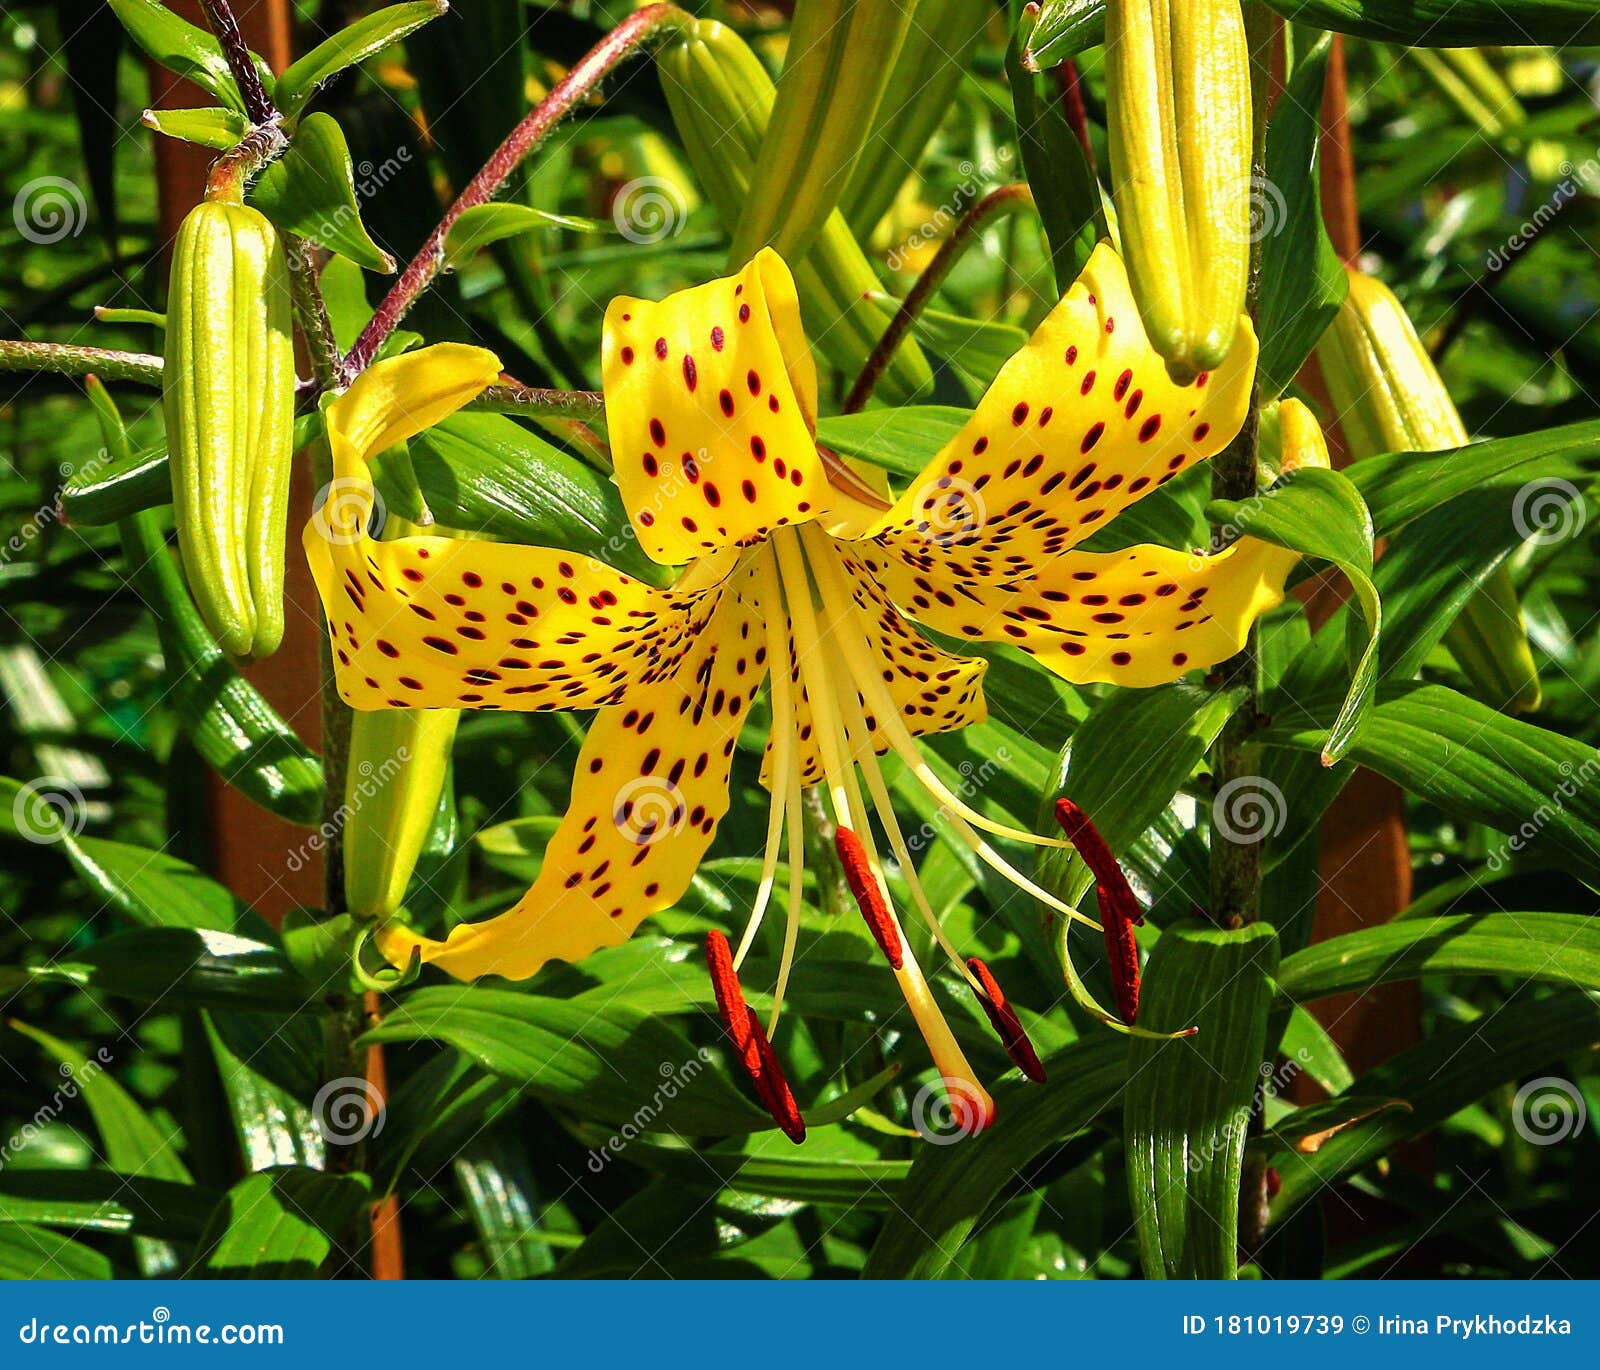 Tiger Lily Flower in the Garden Closeup Stock Image - Image of plants ...